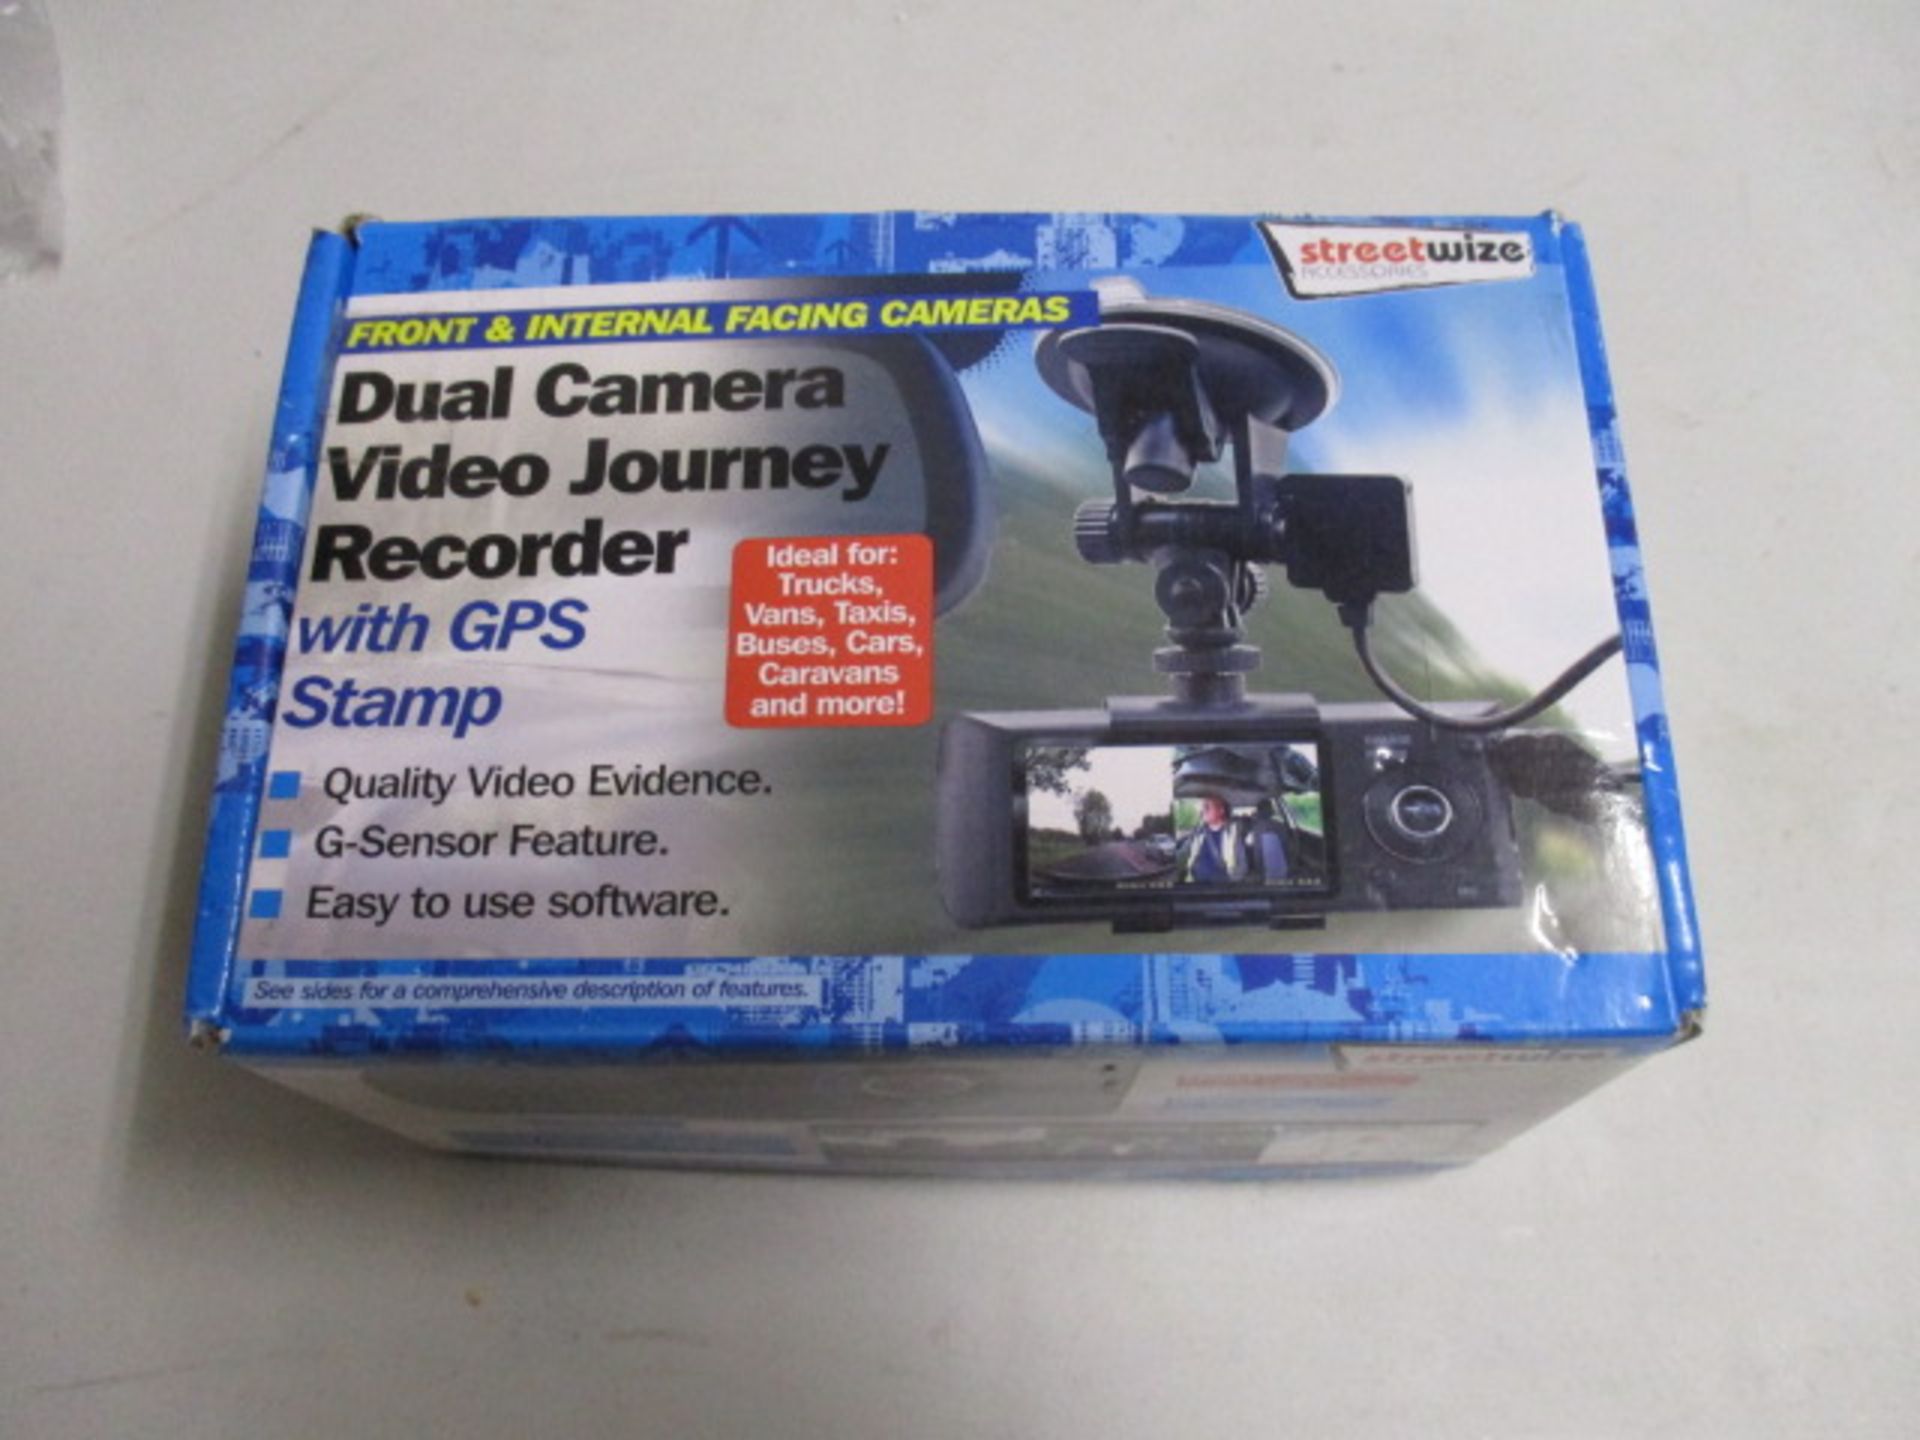 Streetwize Dual Camera video journey recorderwith GPS stamp boxed complete with accessories as